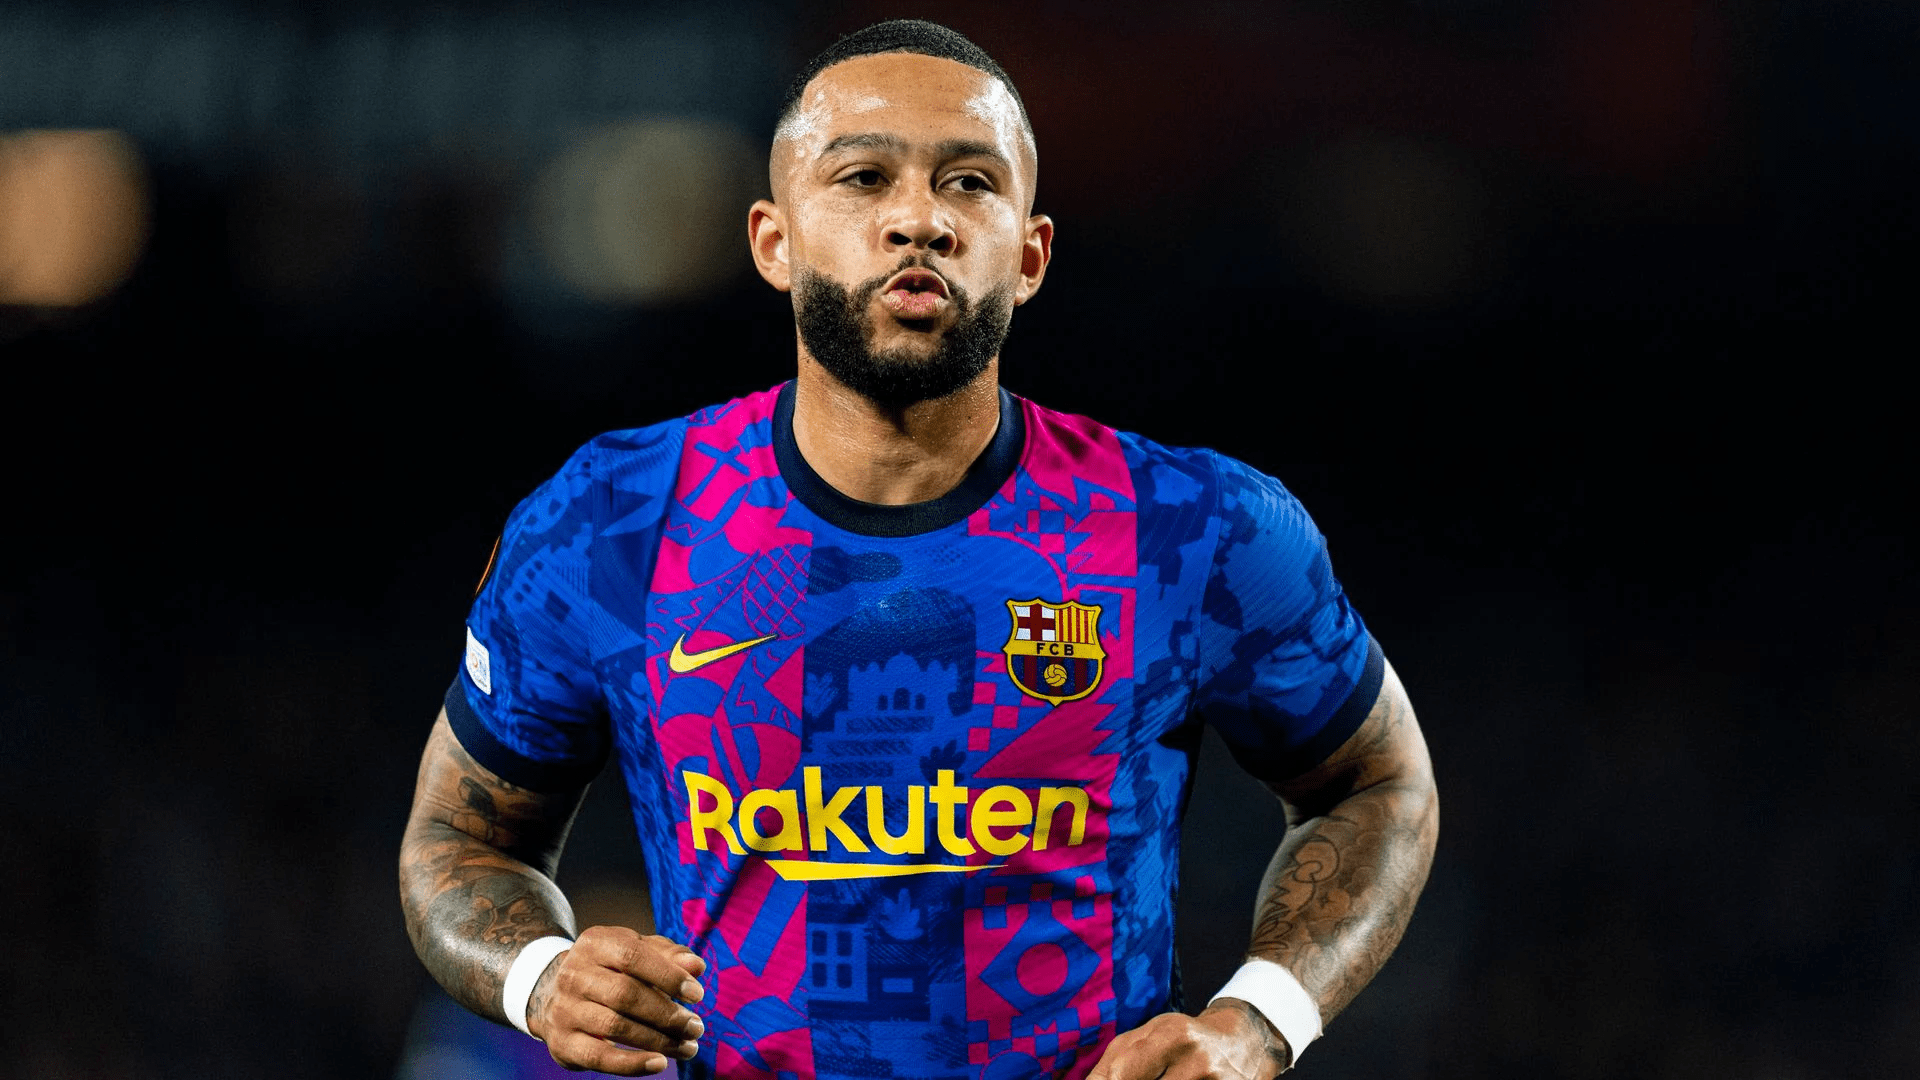 The most likely destination of Depay if he leaves FC Barcelona
